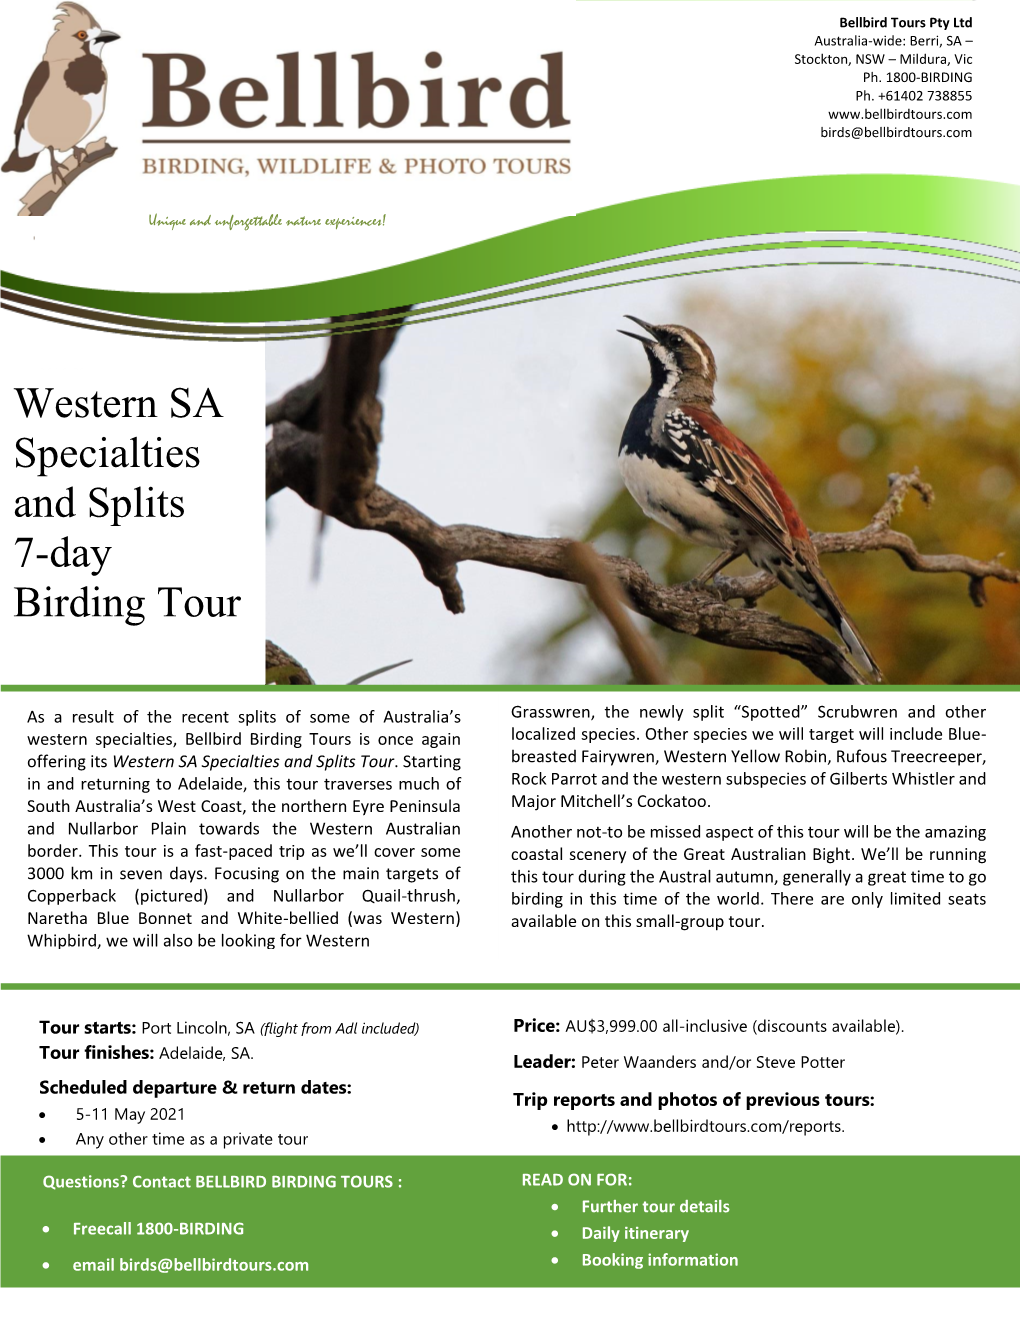 Western Speciaties and Splits 7-Day Tour